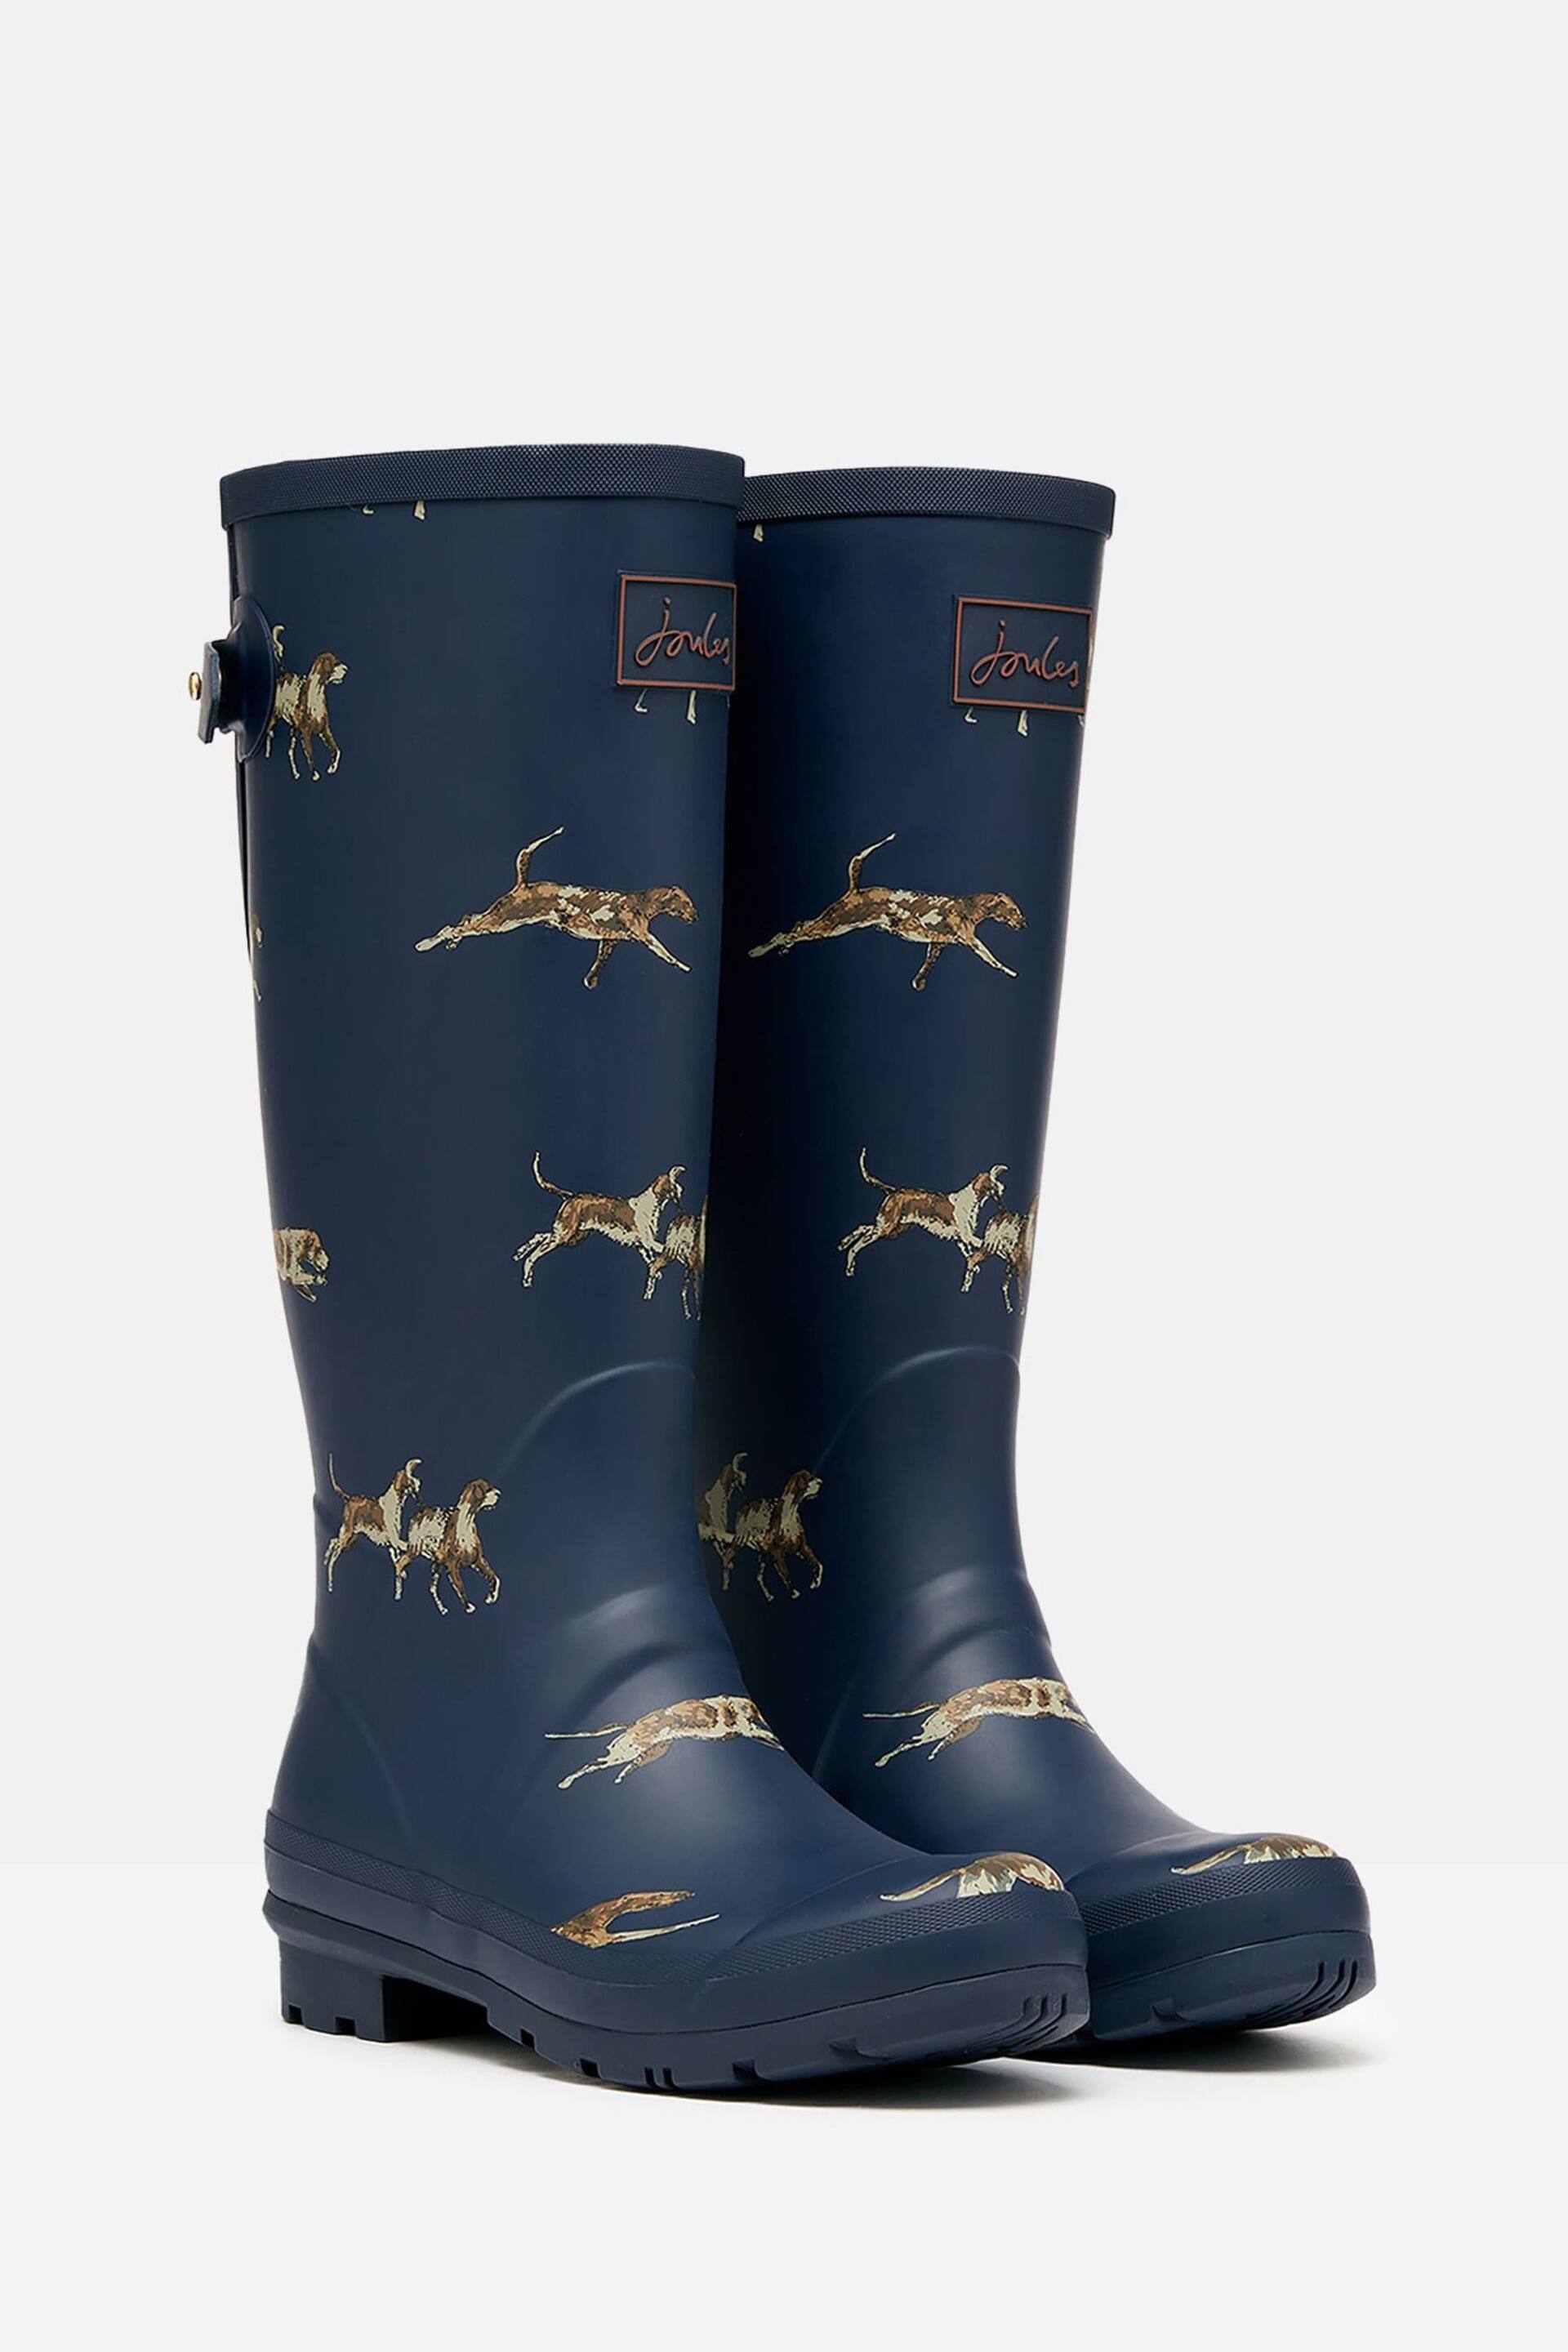 Joules Navy Blue Dog Print Adjustable Tall Wellies - Image 1 of 6